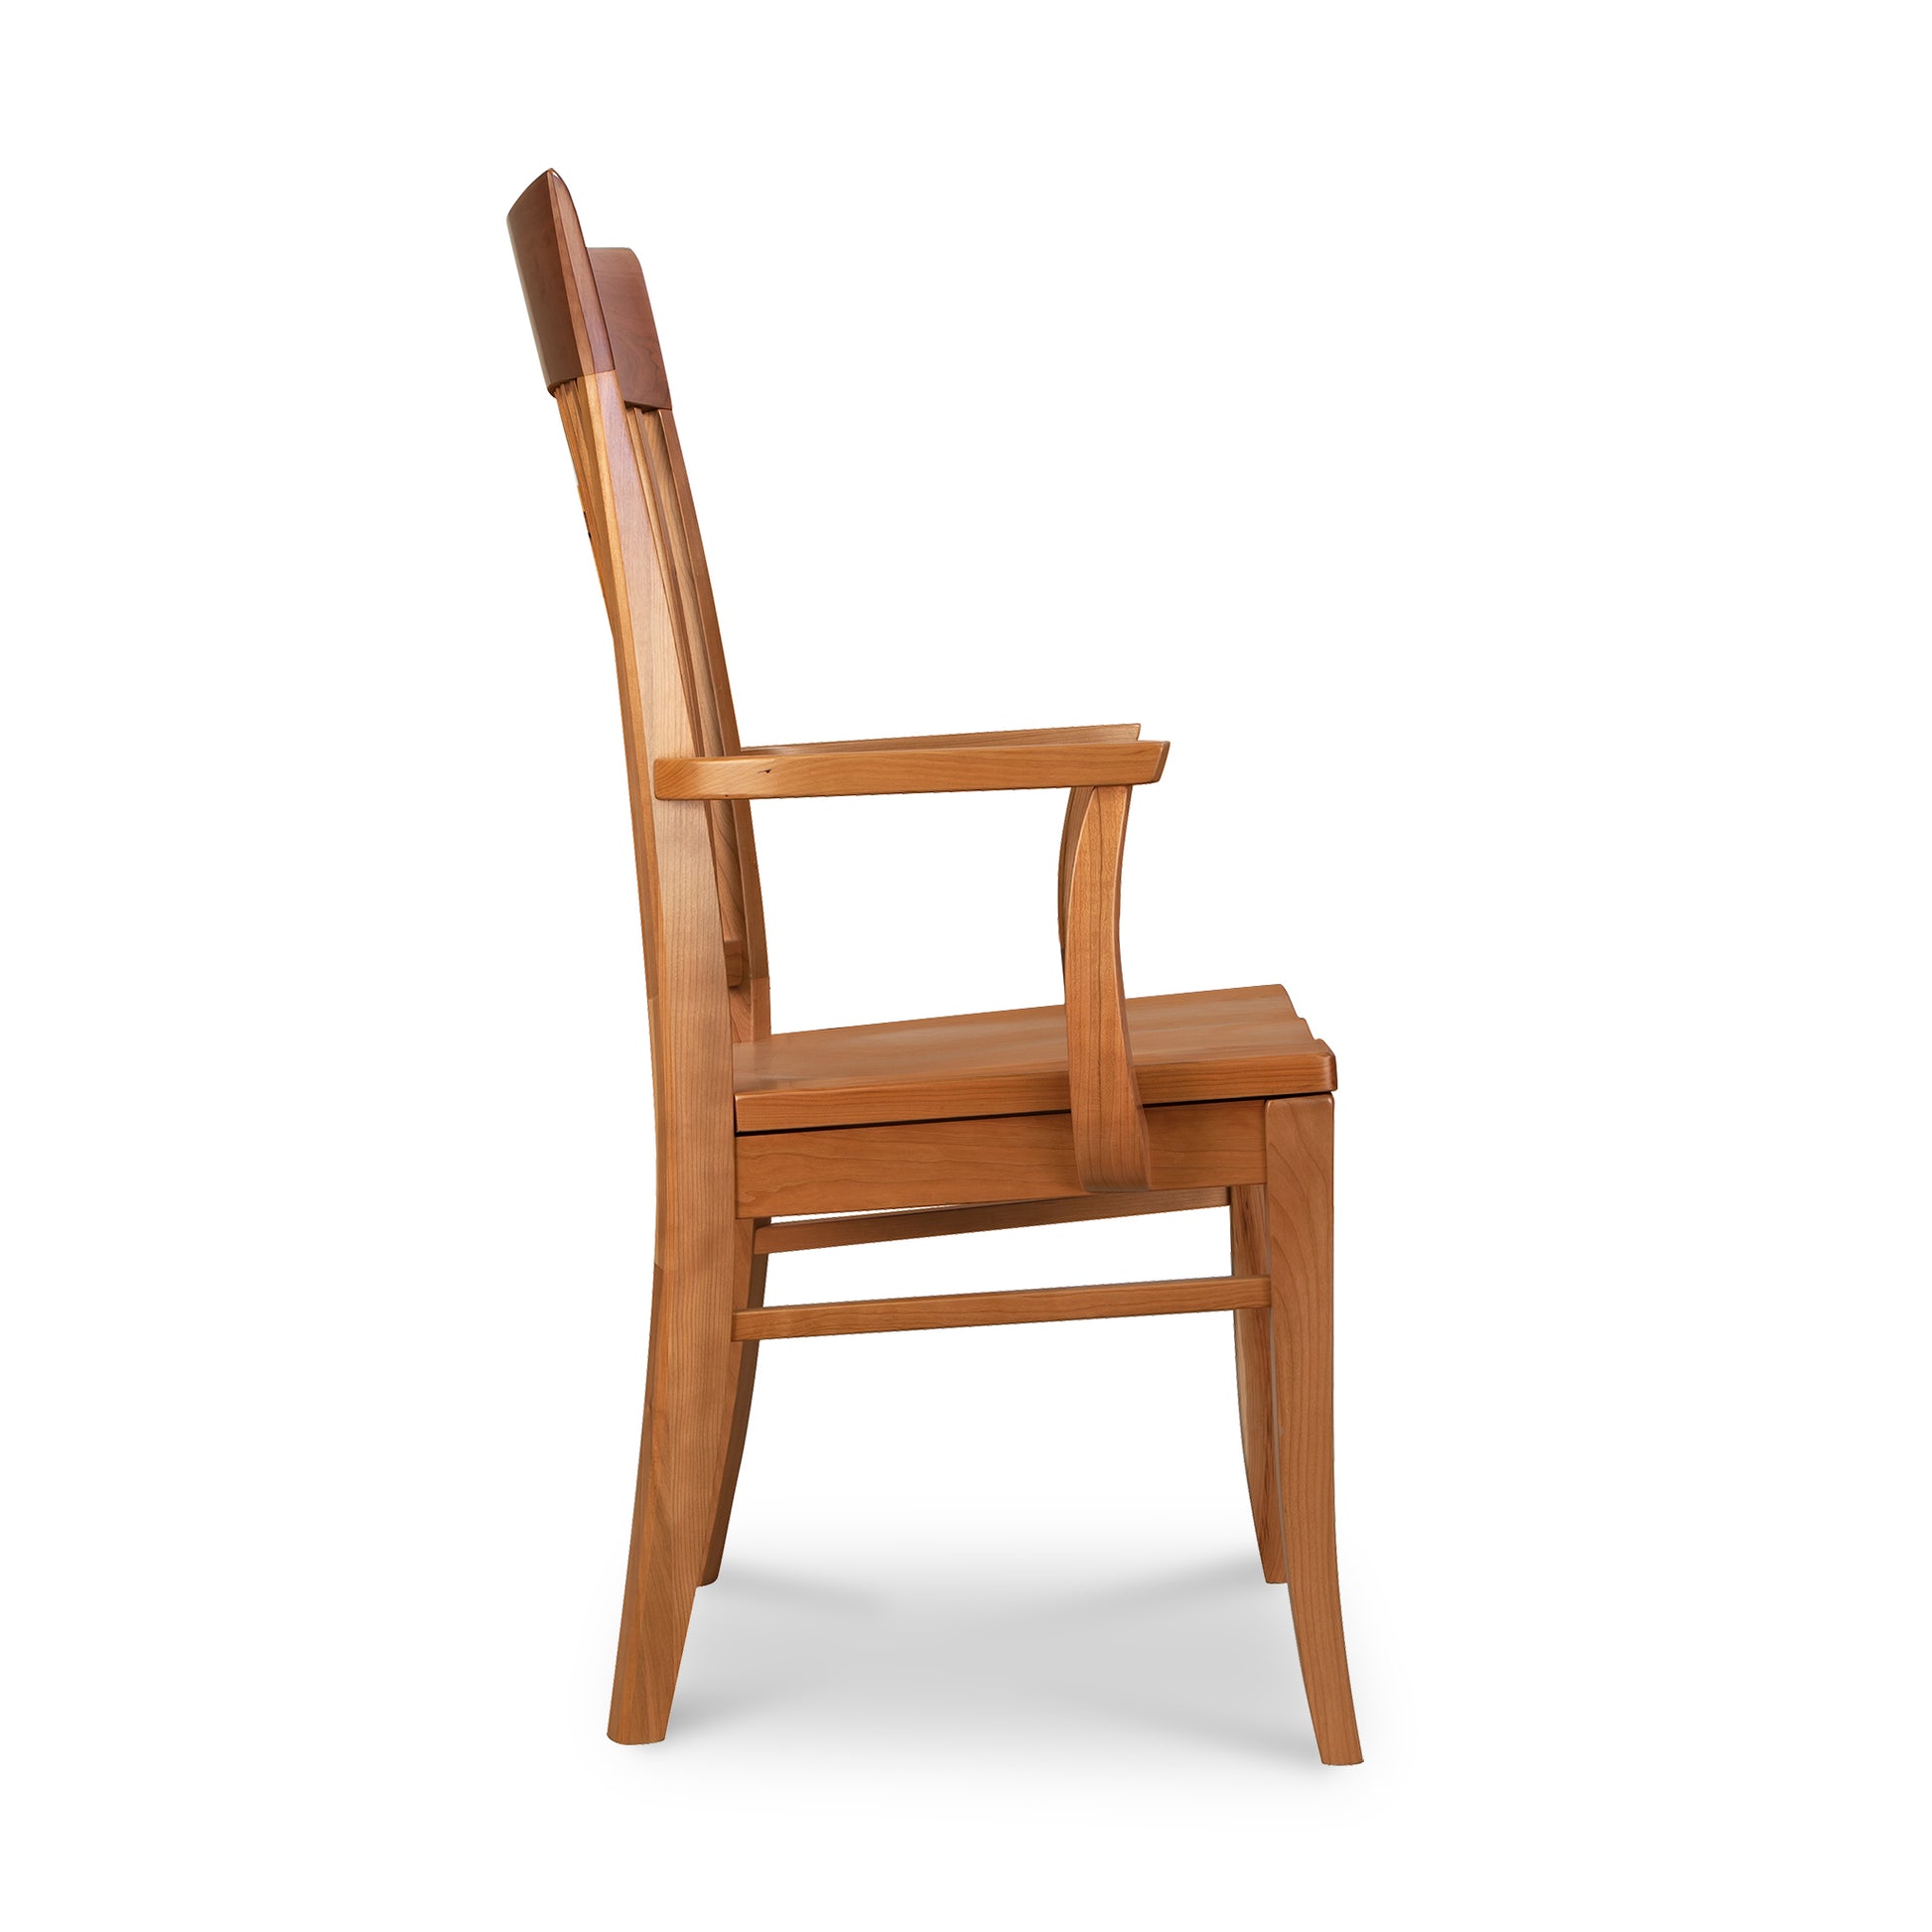 A wooden chair with a wooden seat and back.